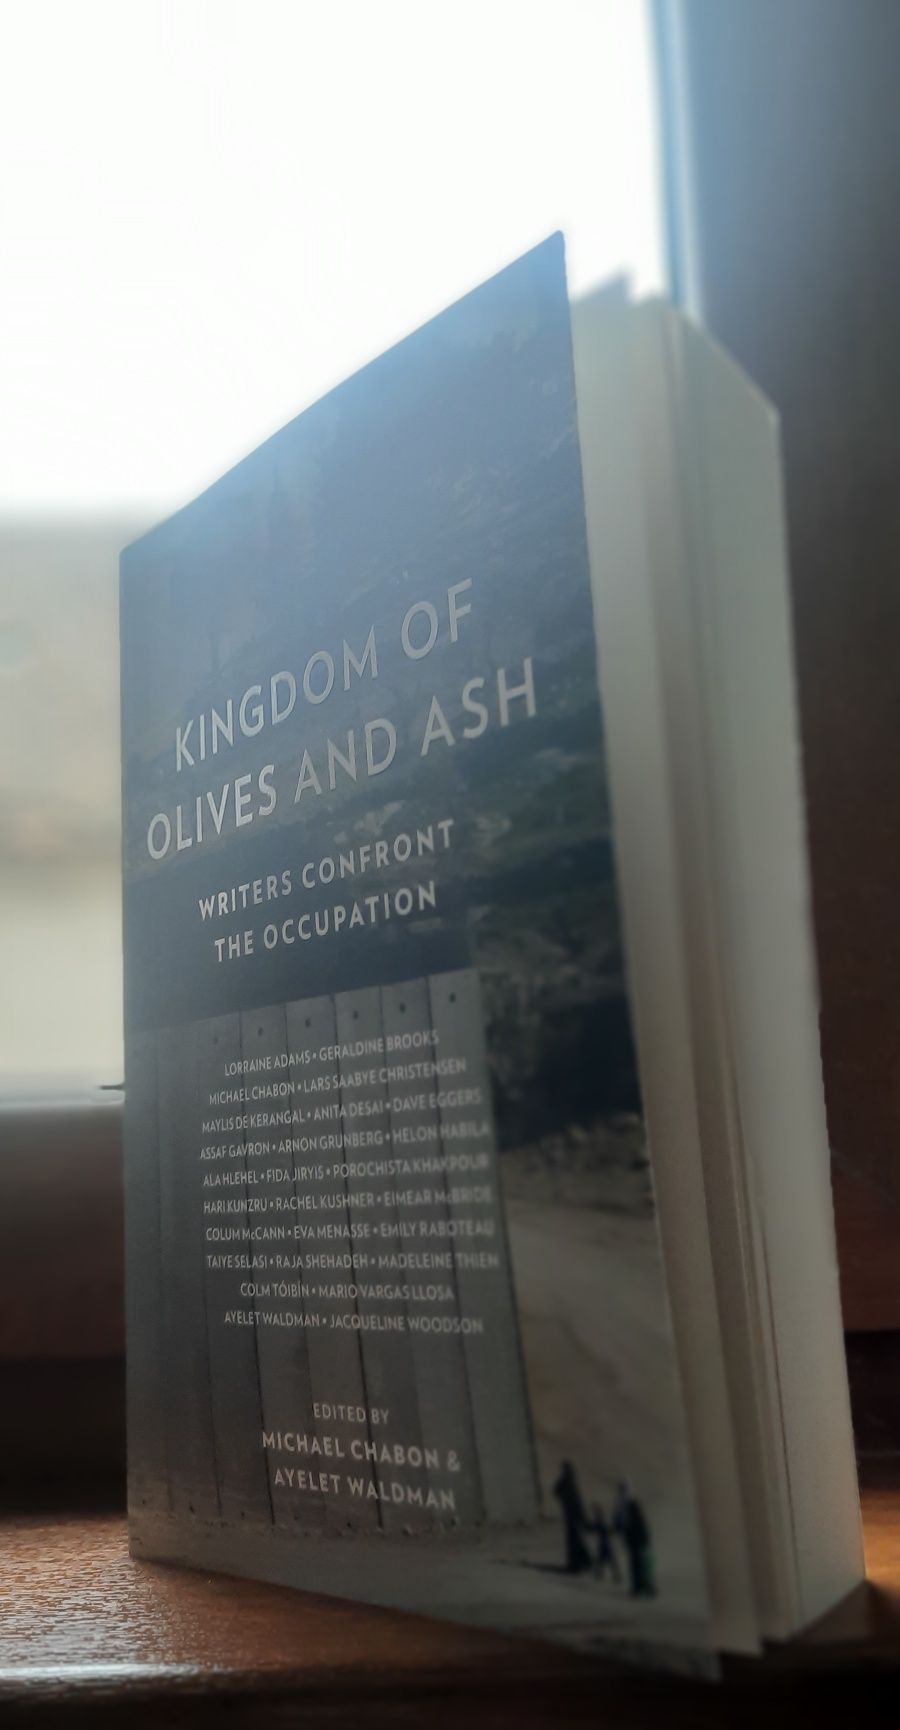 Kingdom of Olives and Ashes. Writers confront the occupation